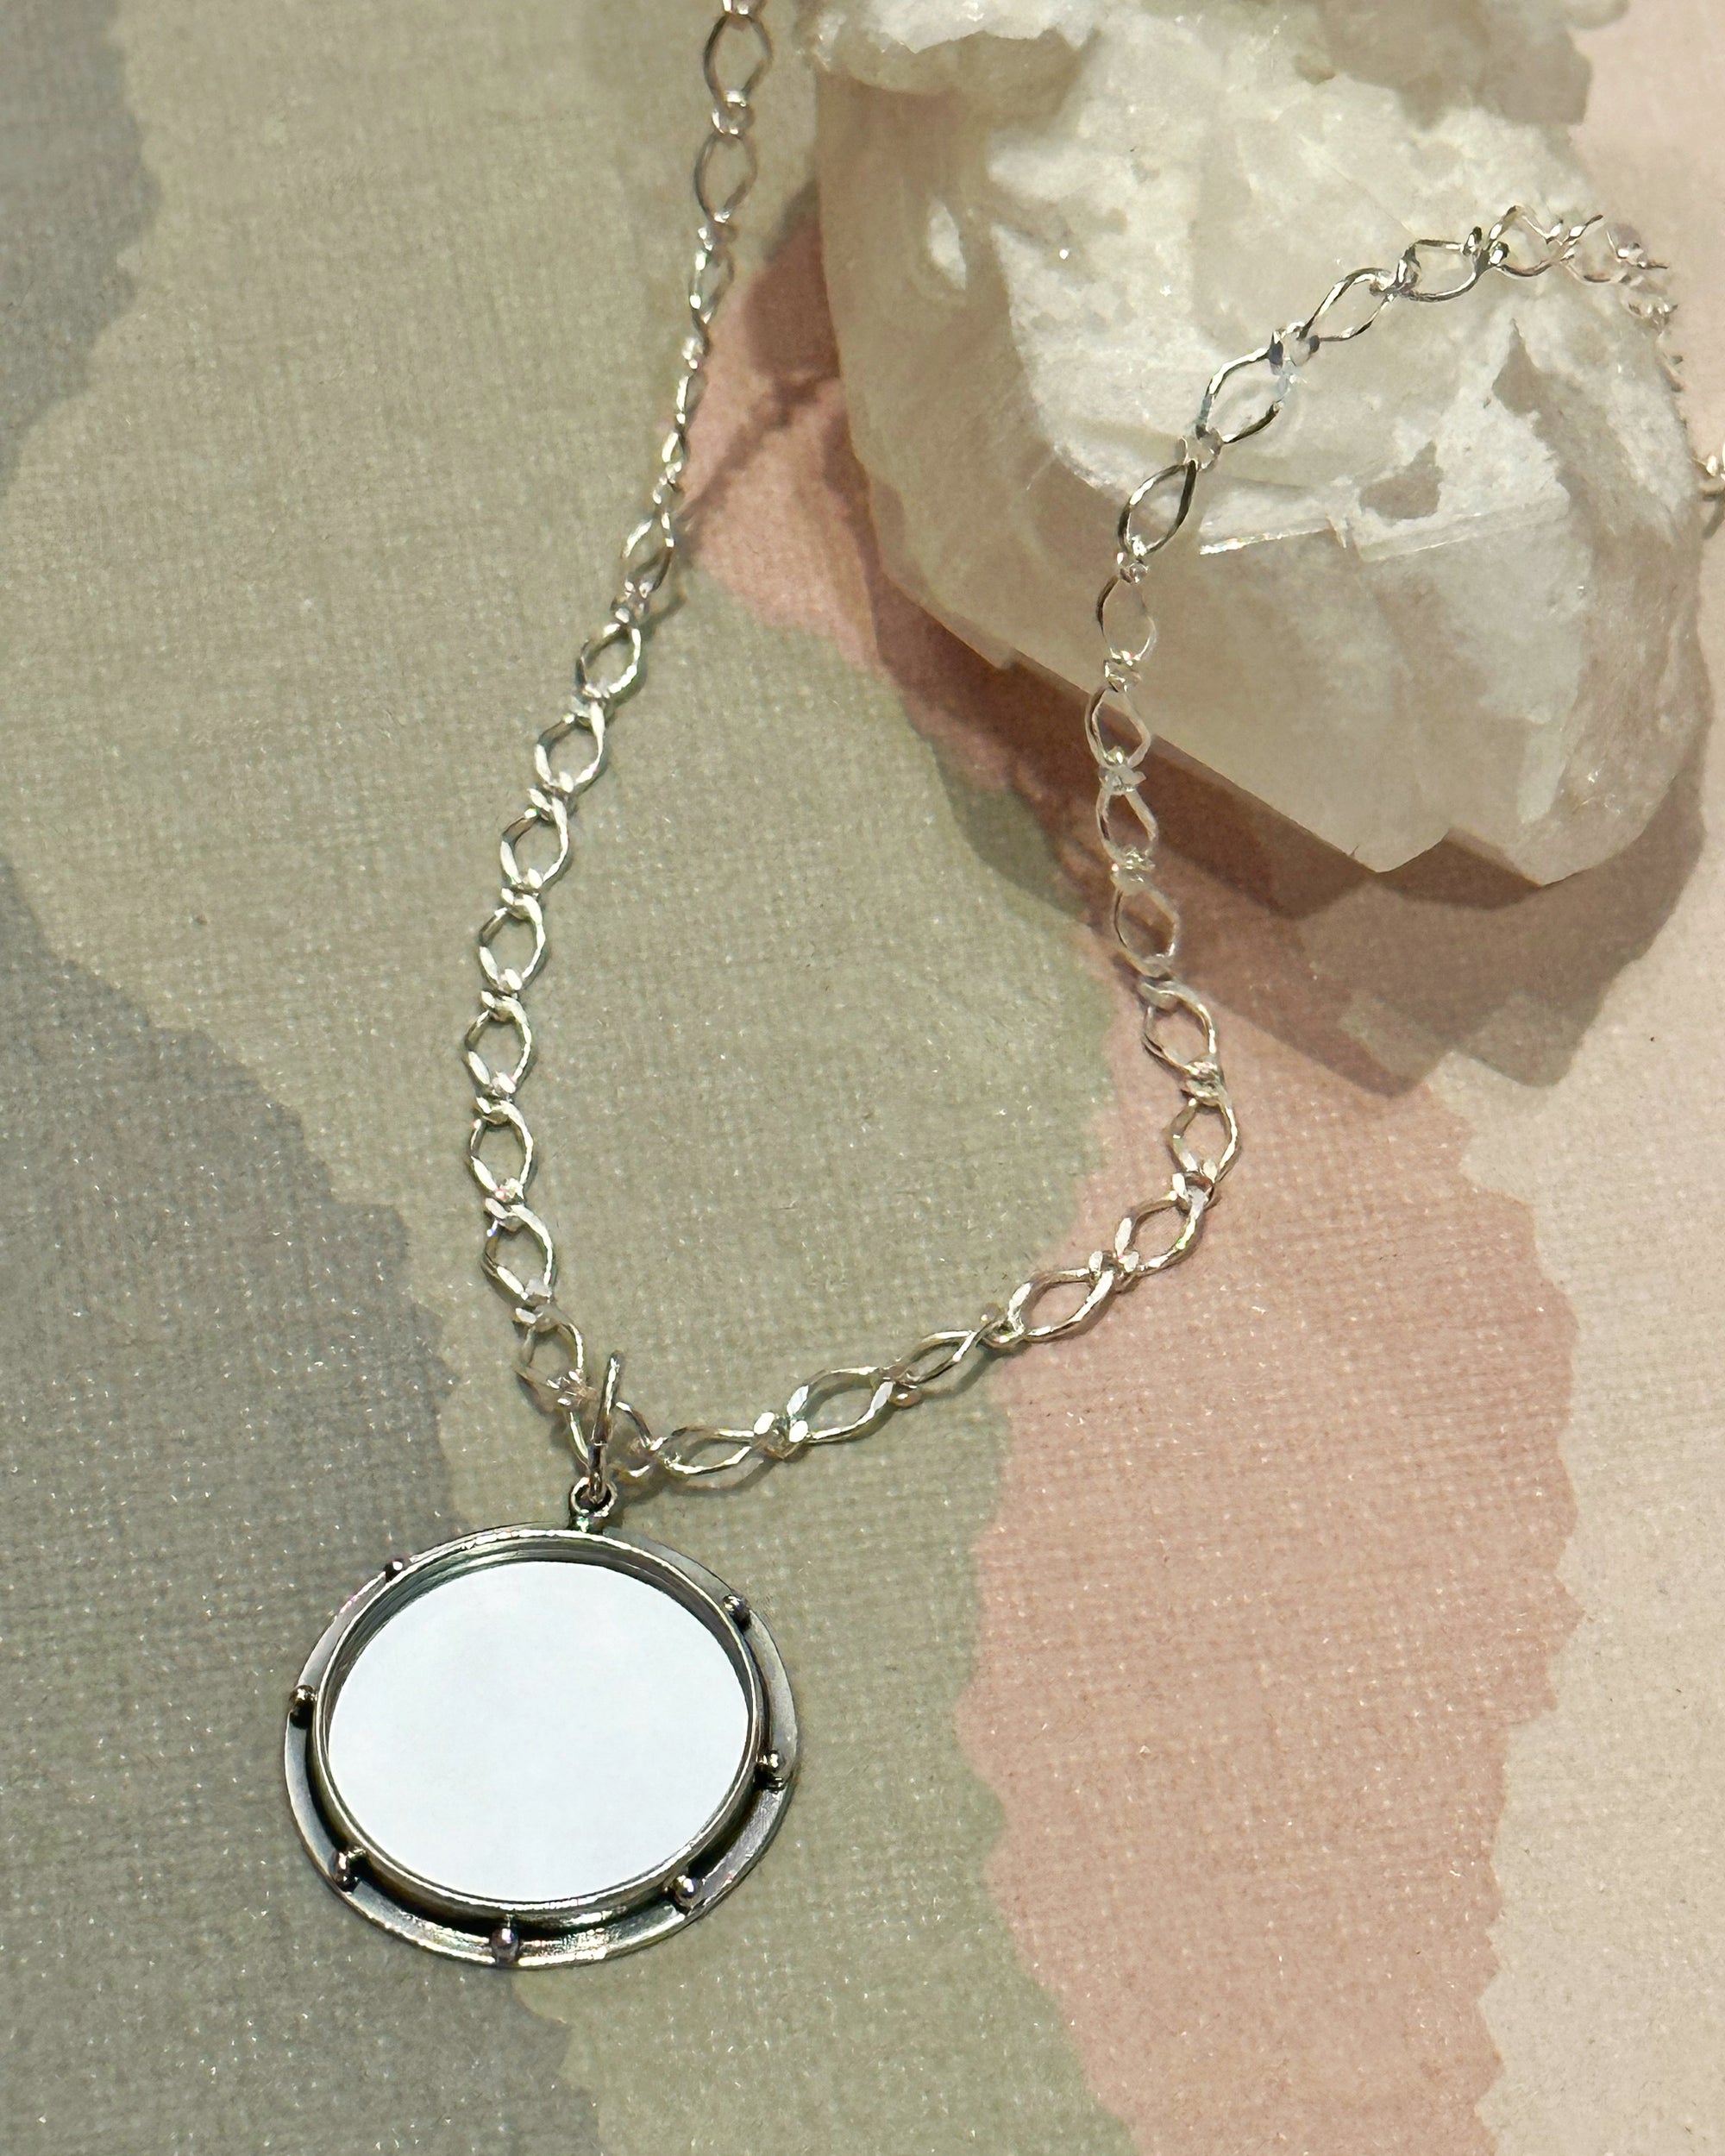 Orb Sterling Silver Mirror Necklace - Holistic Arts